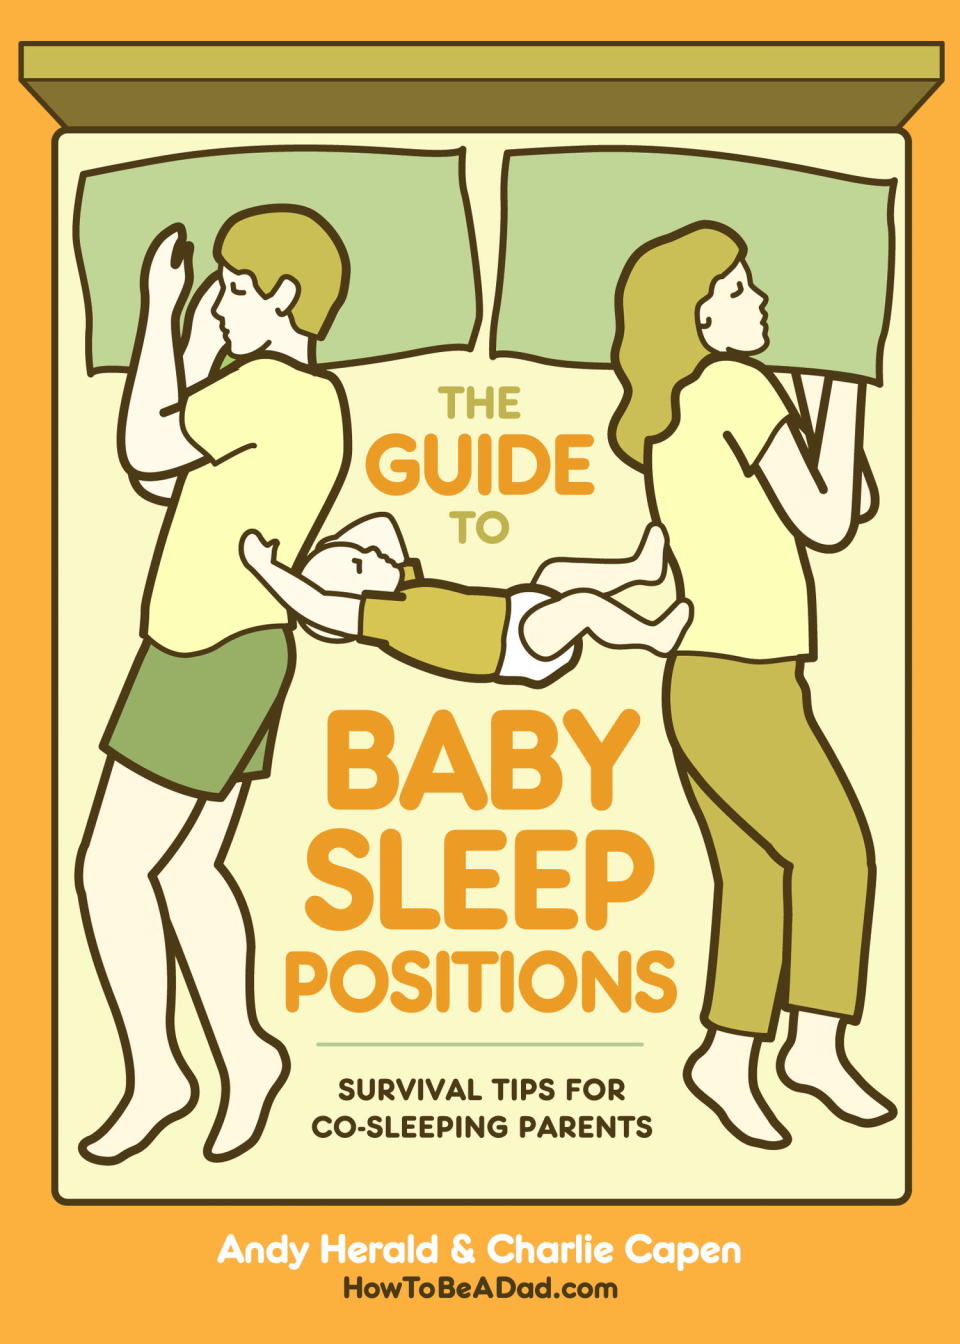 This book cover image released by Potter Style shows "The Guide to Baby Sleep Positions: Survival Tips for Co-Sleeping Parents," by Andy Herald and Charlie Capen. Mother's Day has taken a dark yet funny turn in a fresh round of books about derelict parenting. These moms curse a lot, drink to excess, reveal scary truths and draw twisted little stick figures of their kids pooping and whining relentlessly. They love their kids, to be sure, but there's something about the scorched earth narrative that sells memoirish parenting books these days, so they went for it. And they're joined by some funny dads who touch on motherhood in equally twisted ways. (AP Photo/Potter Style)